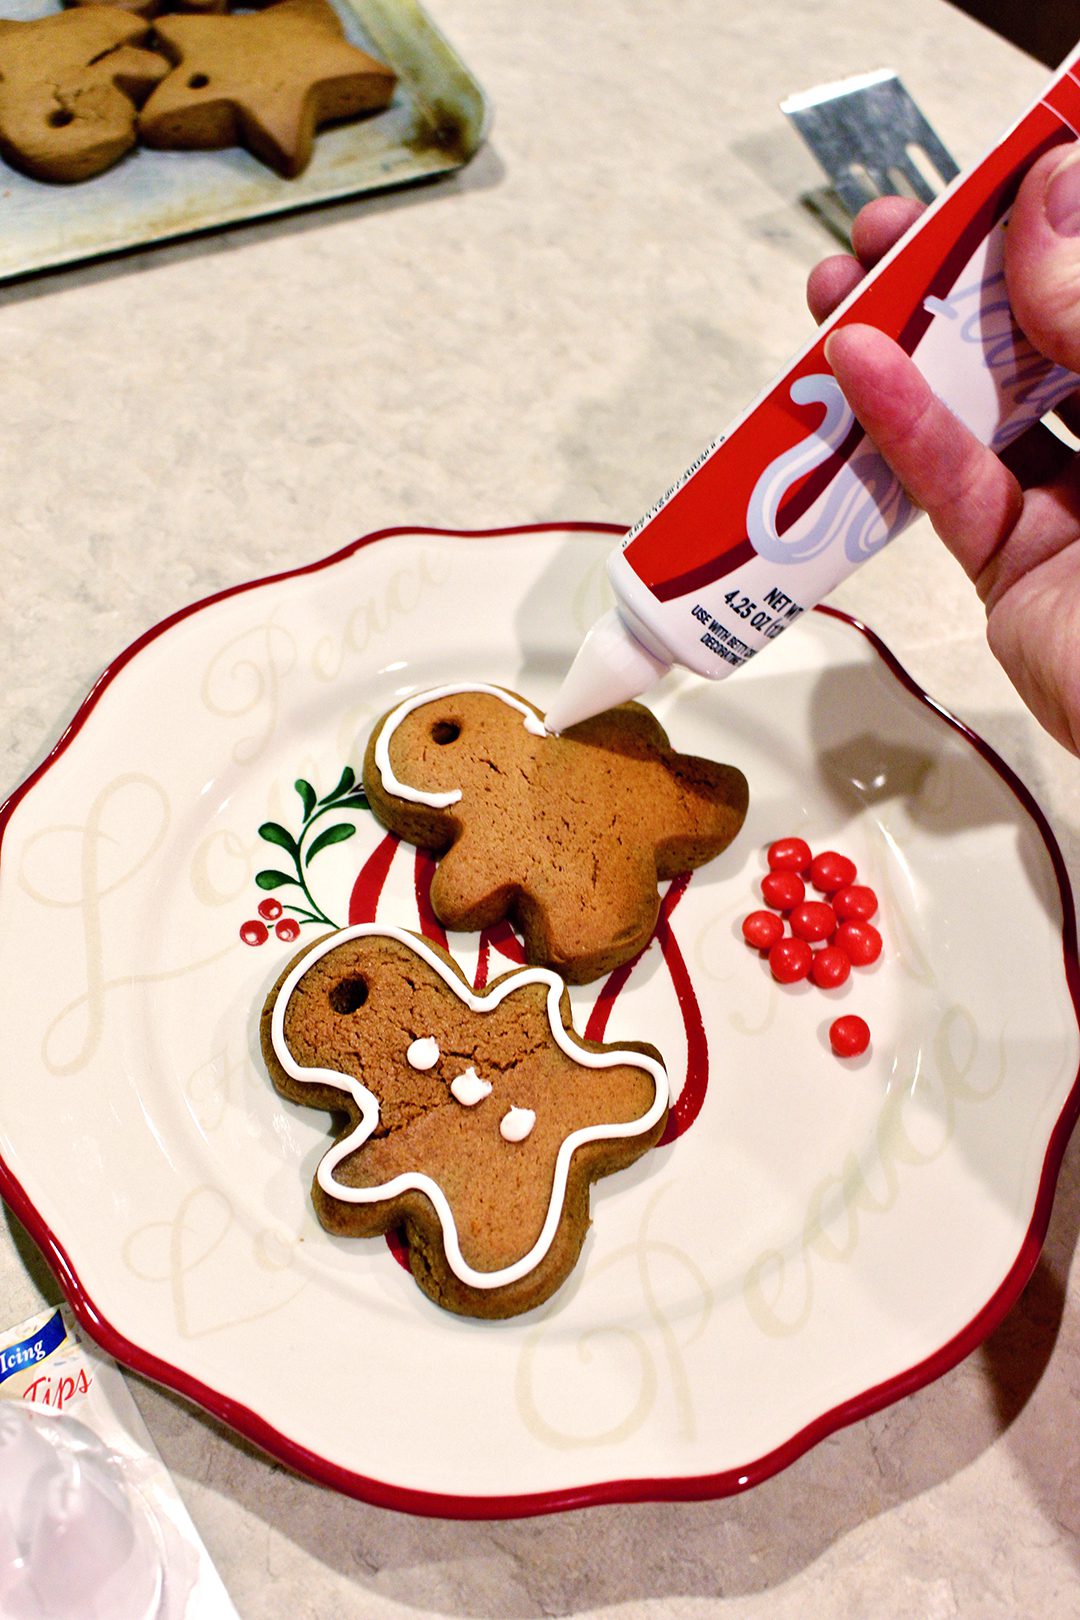 Adding icing from a piping container to gingerbread cookies on a Christmas plate.